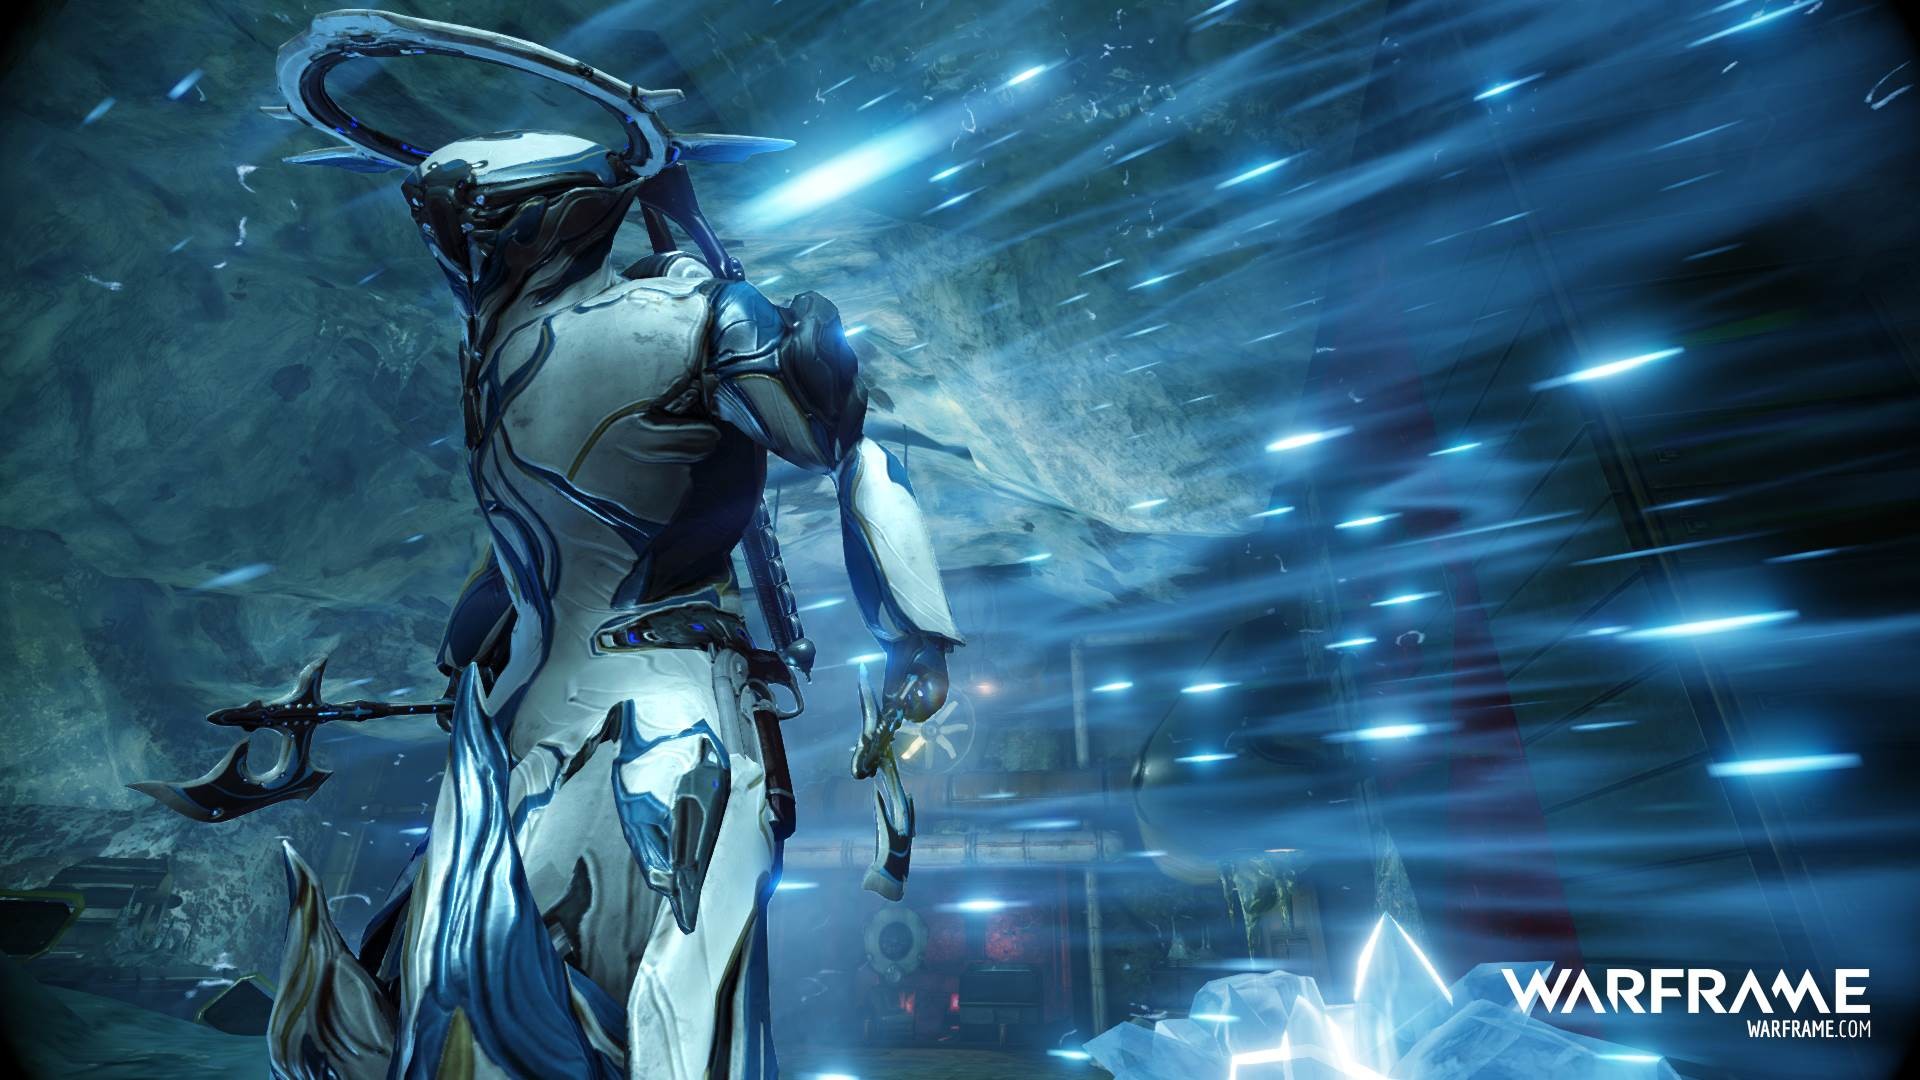 1920x1080 Warframe HD Wallpapers and Backgrounds